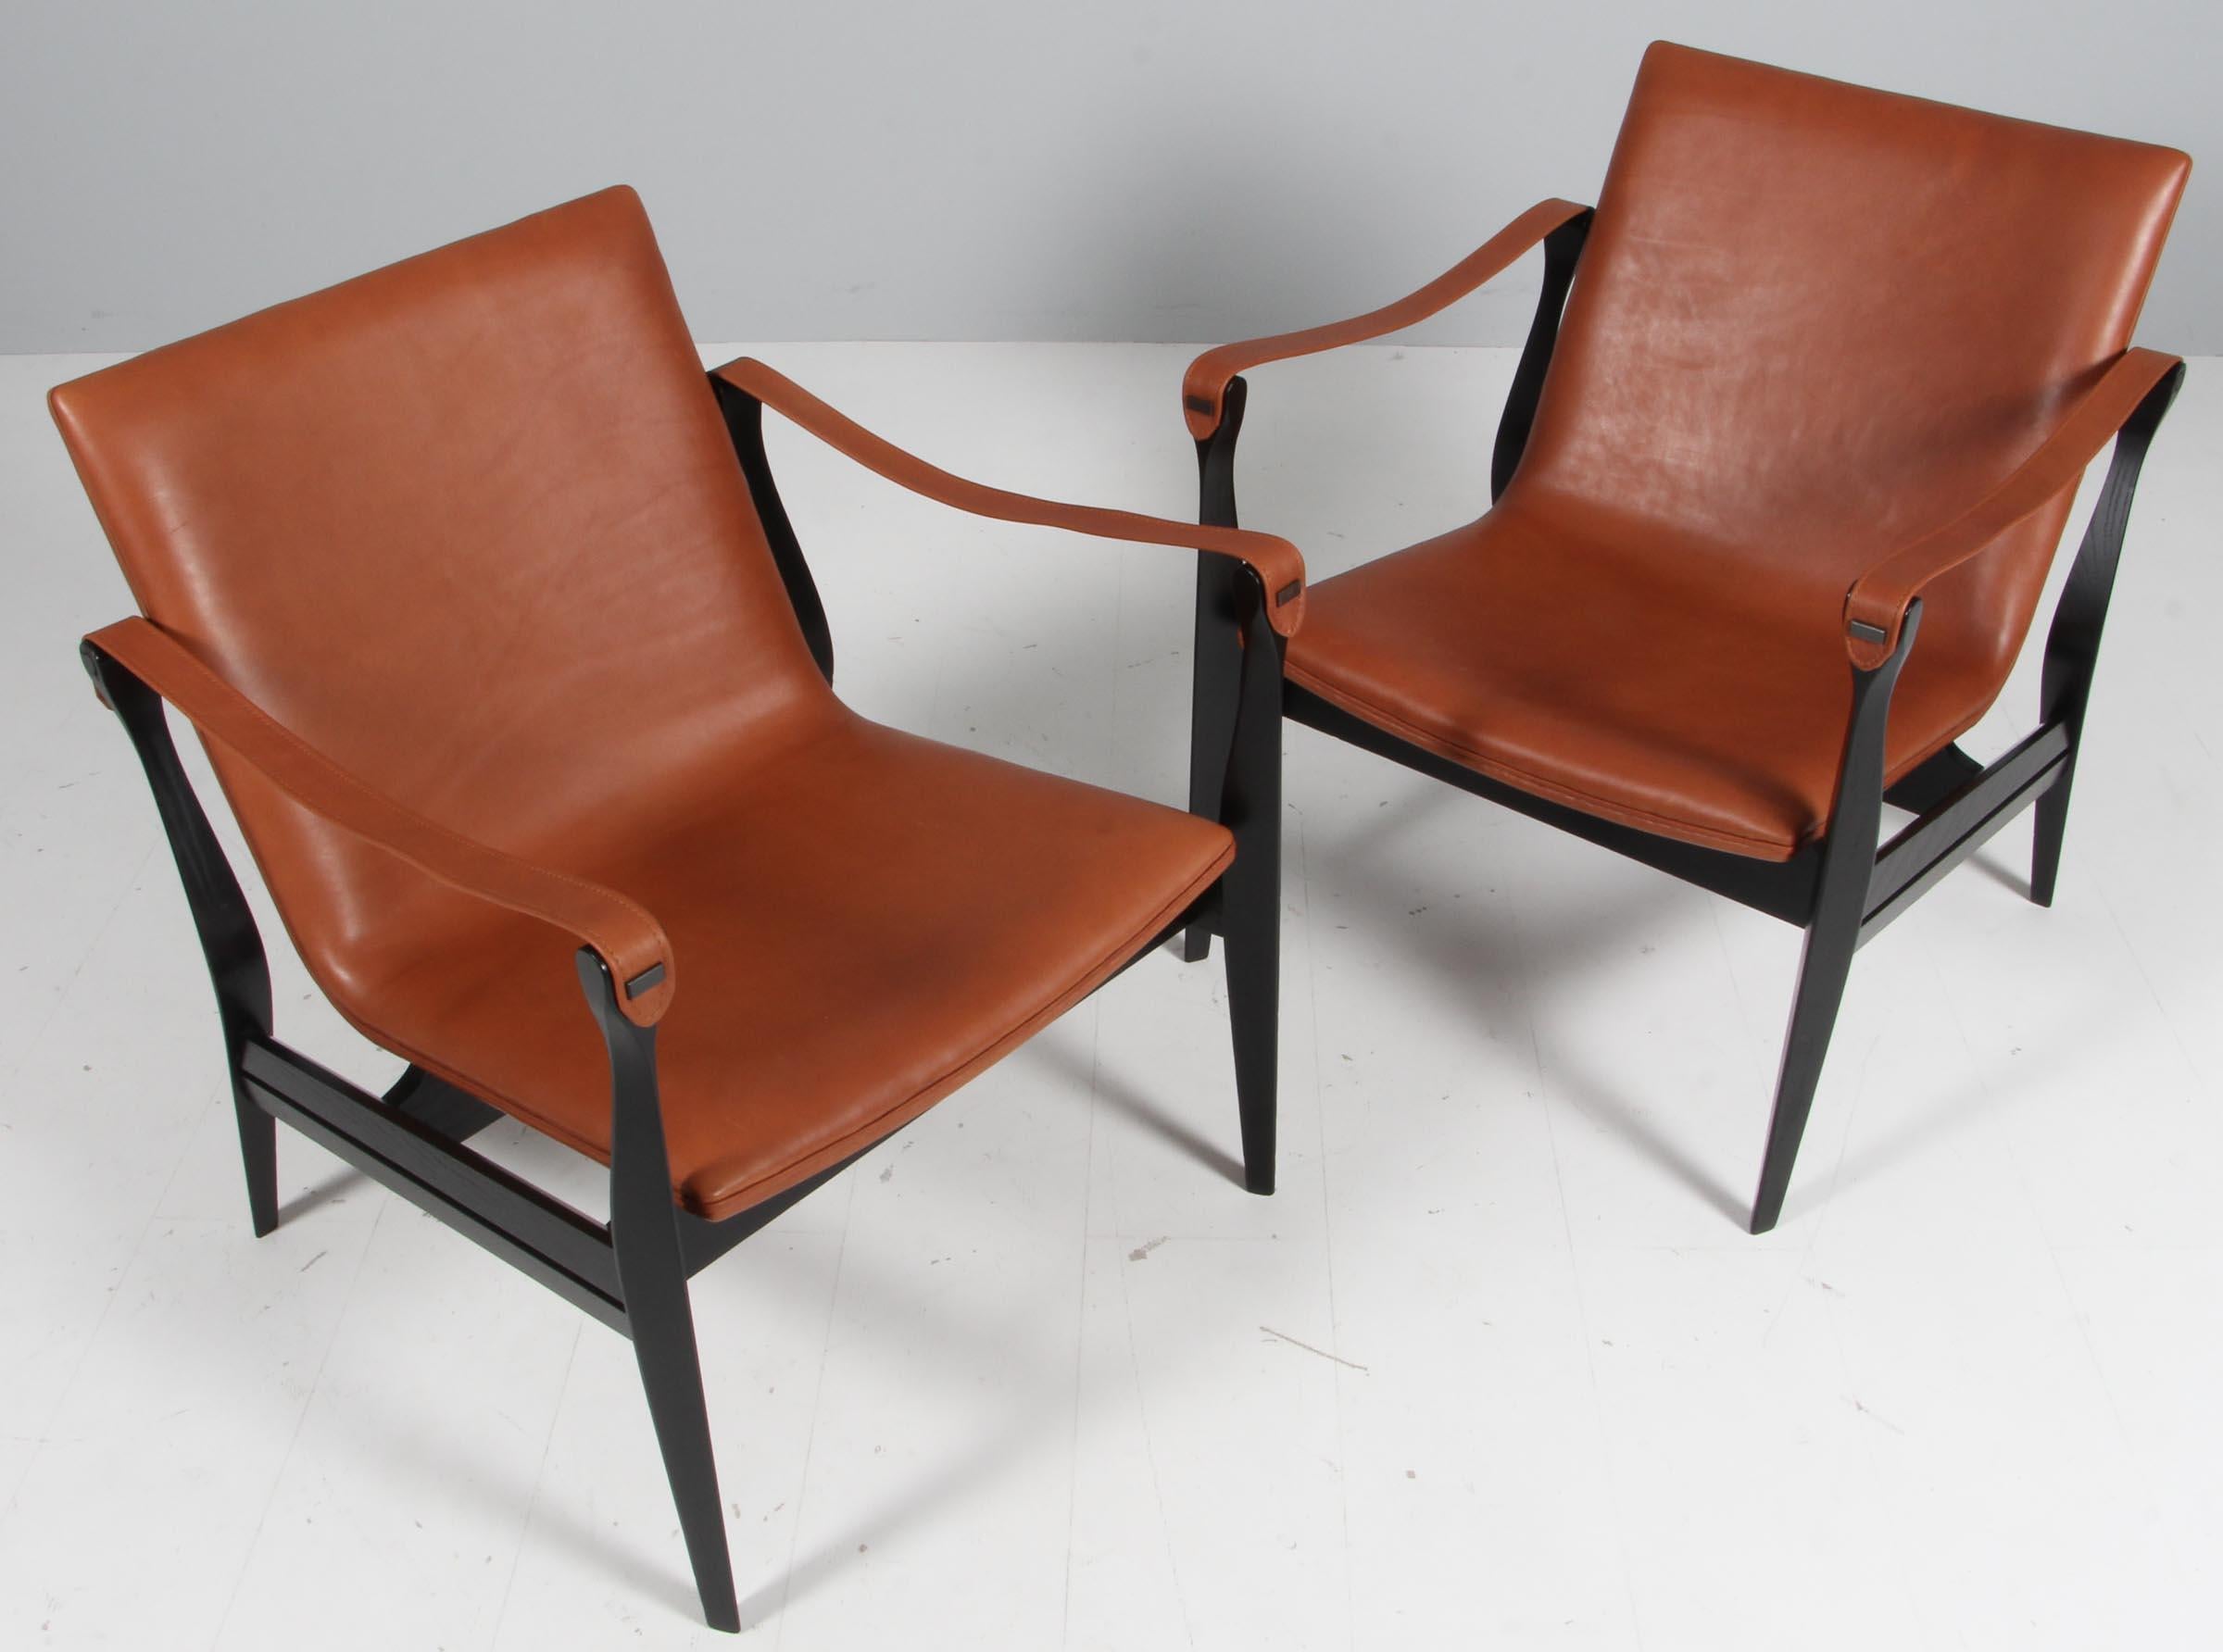 Very beautiful Safari Chair by Ebbe & Karen Clemmensen for Fritz Hansen designed in 1958 and produced in Denmark. The frame is made of ash and the seat is newly upholstered with a brown leather. Both chairs are in a very good condition, refurbished